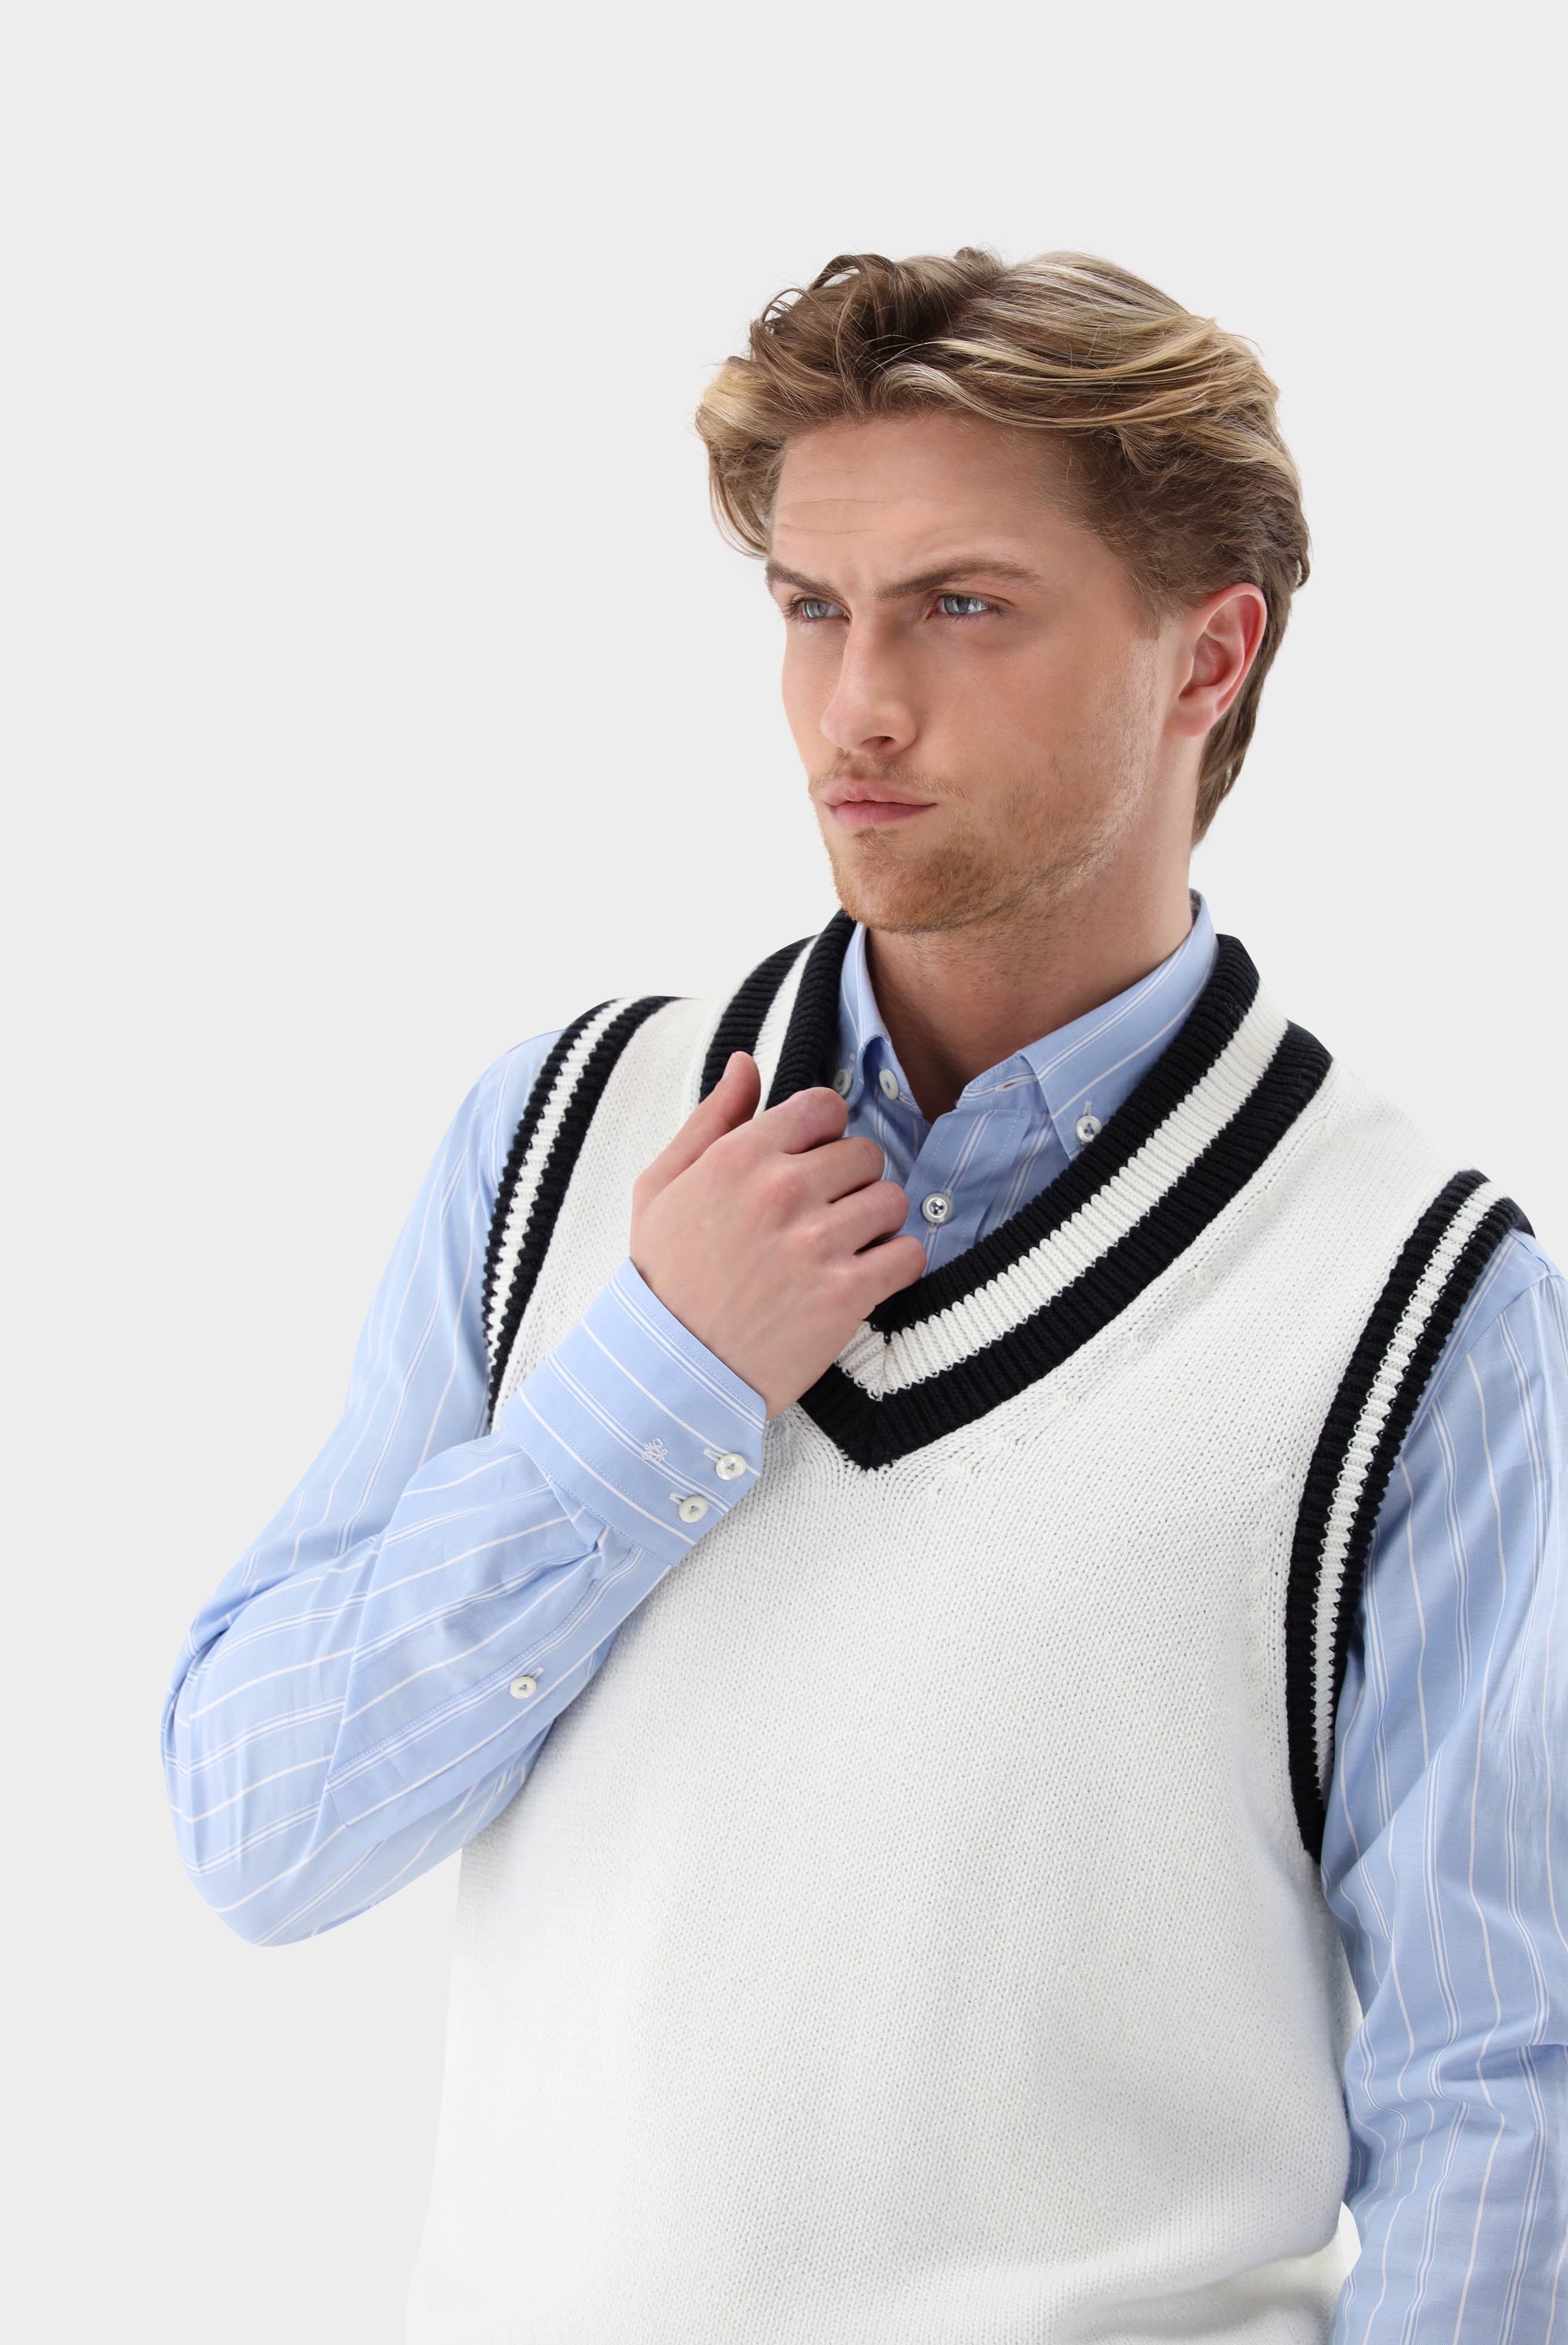 Sweaters & Cardigans+Retro Tennis Sweater Vest Made of Cotton+82.8641.S7.S00262.100.S